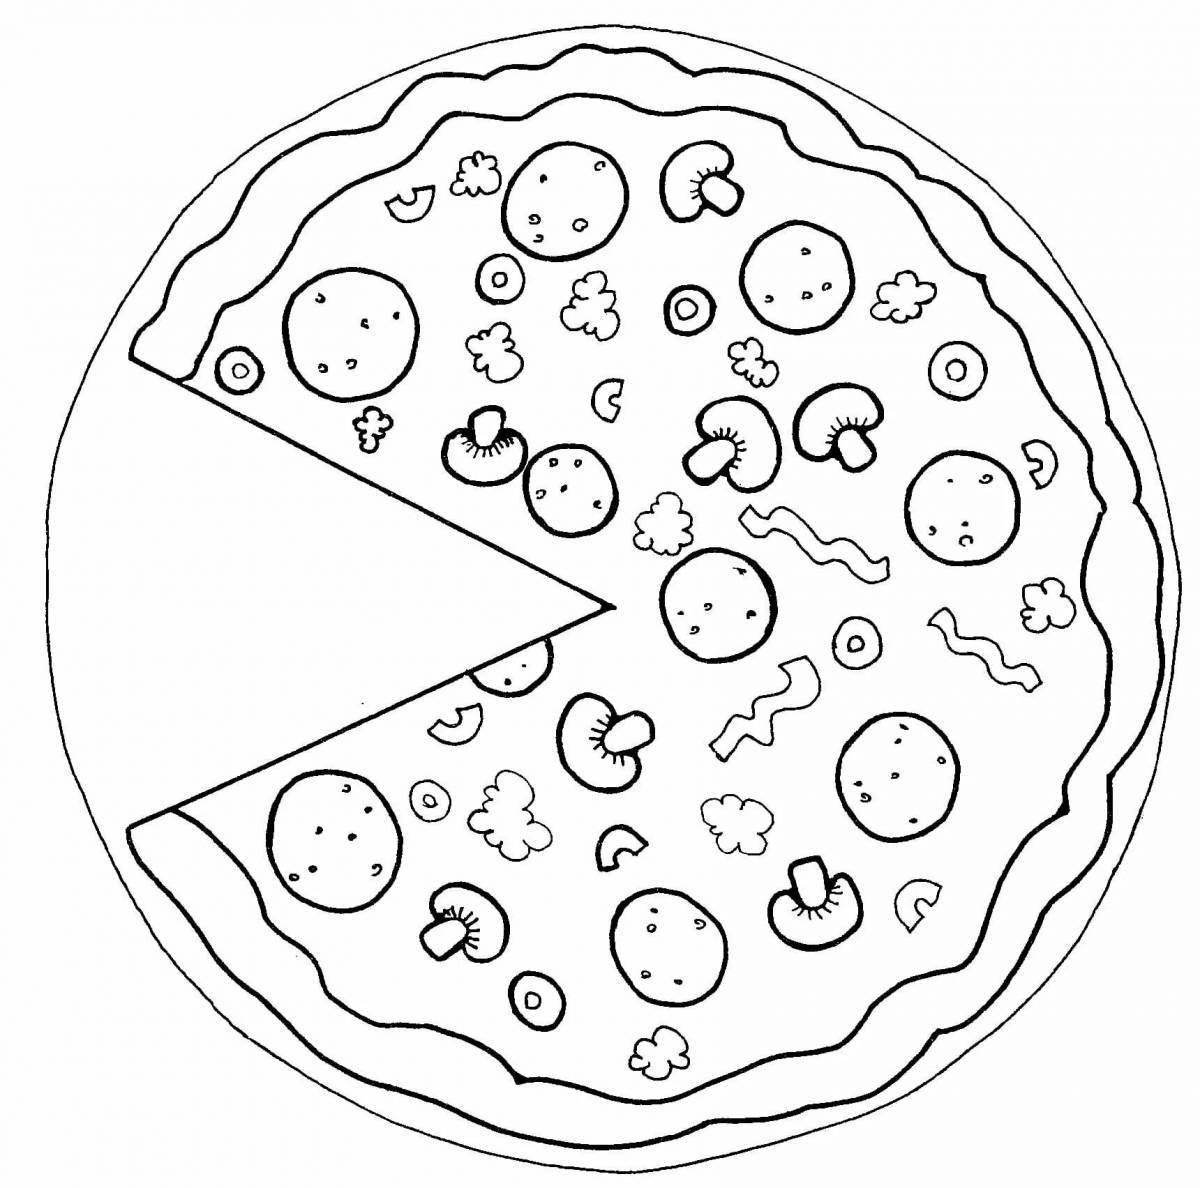 Attractive pizza and sausage coloring book